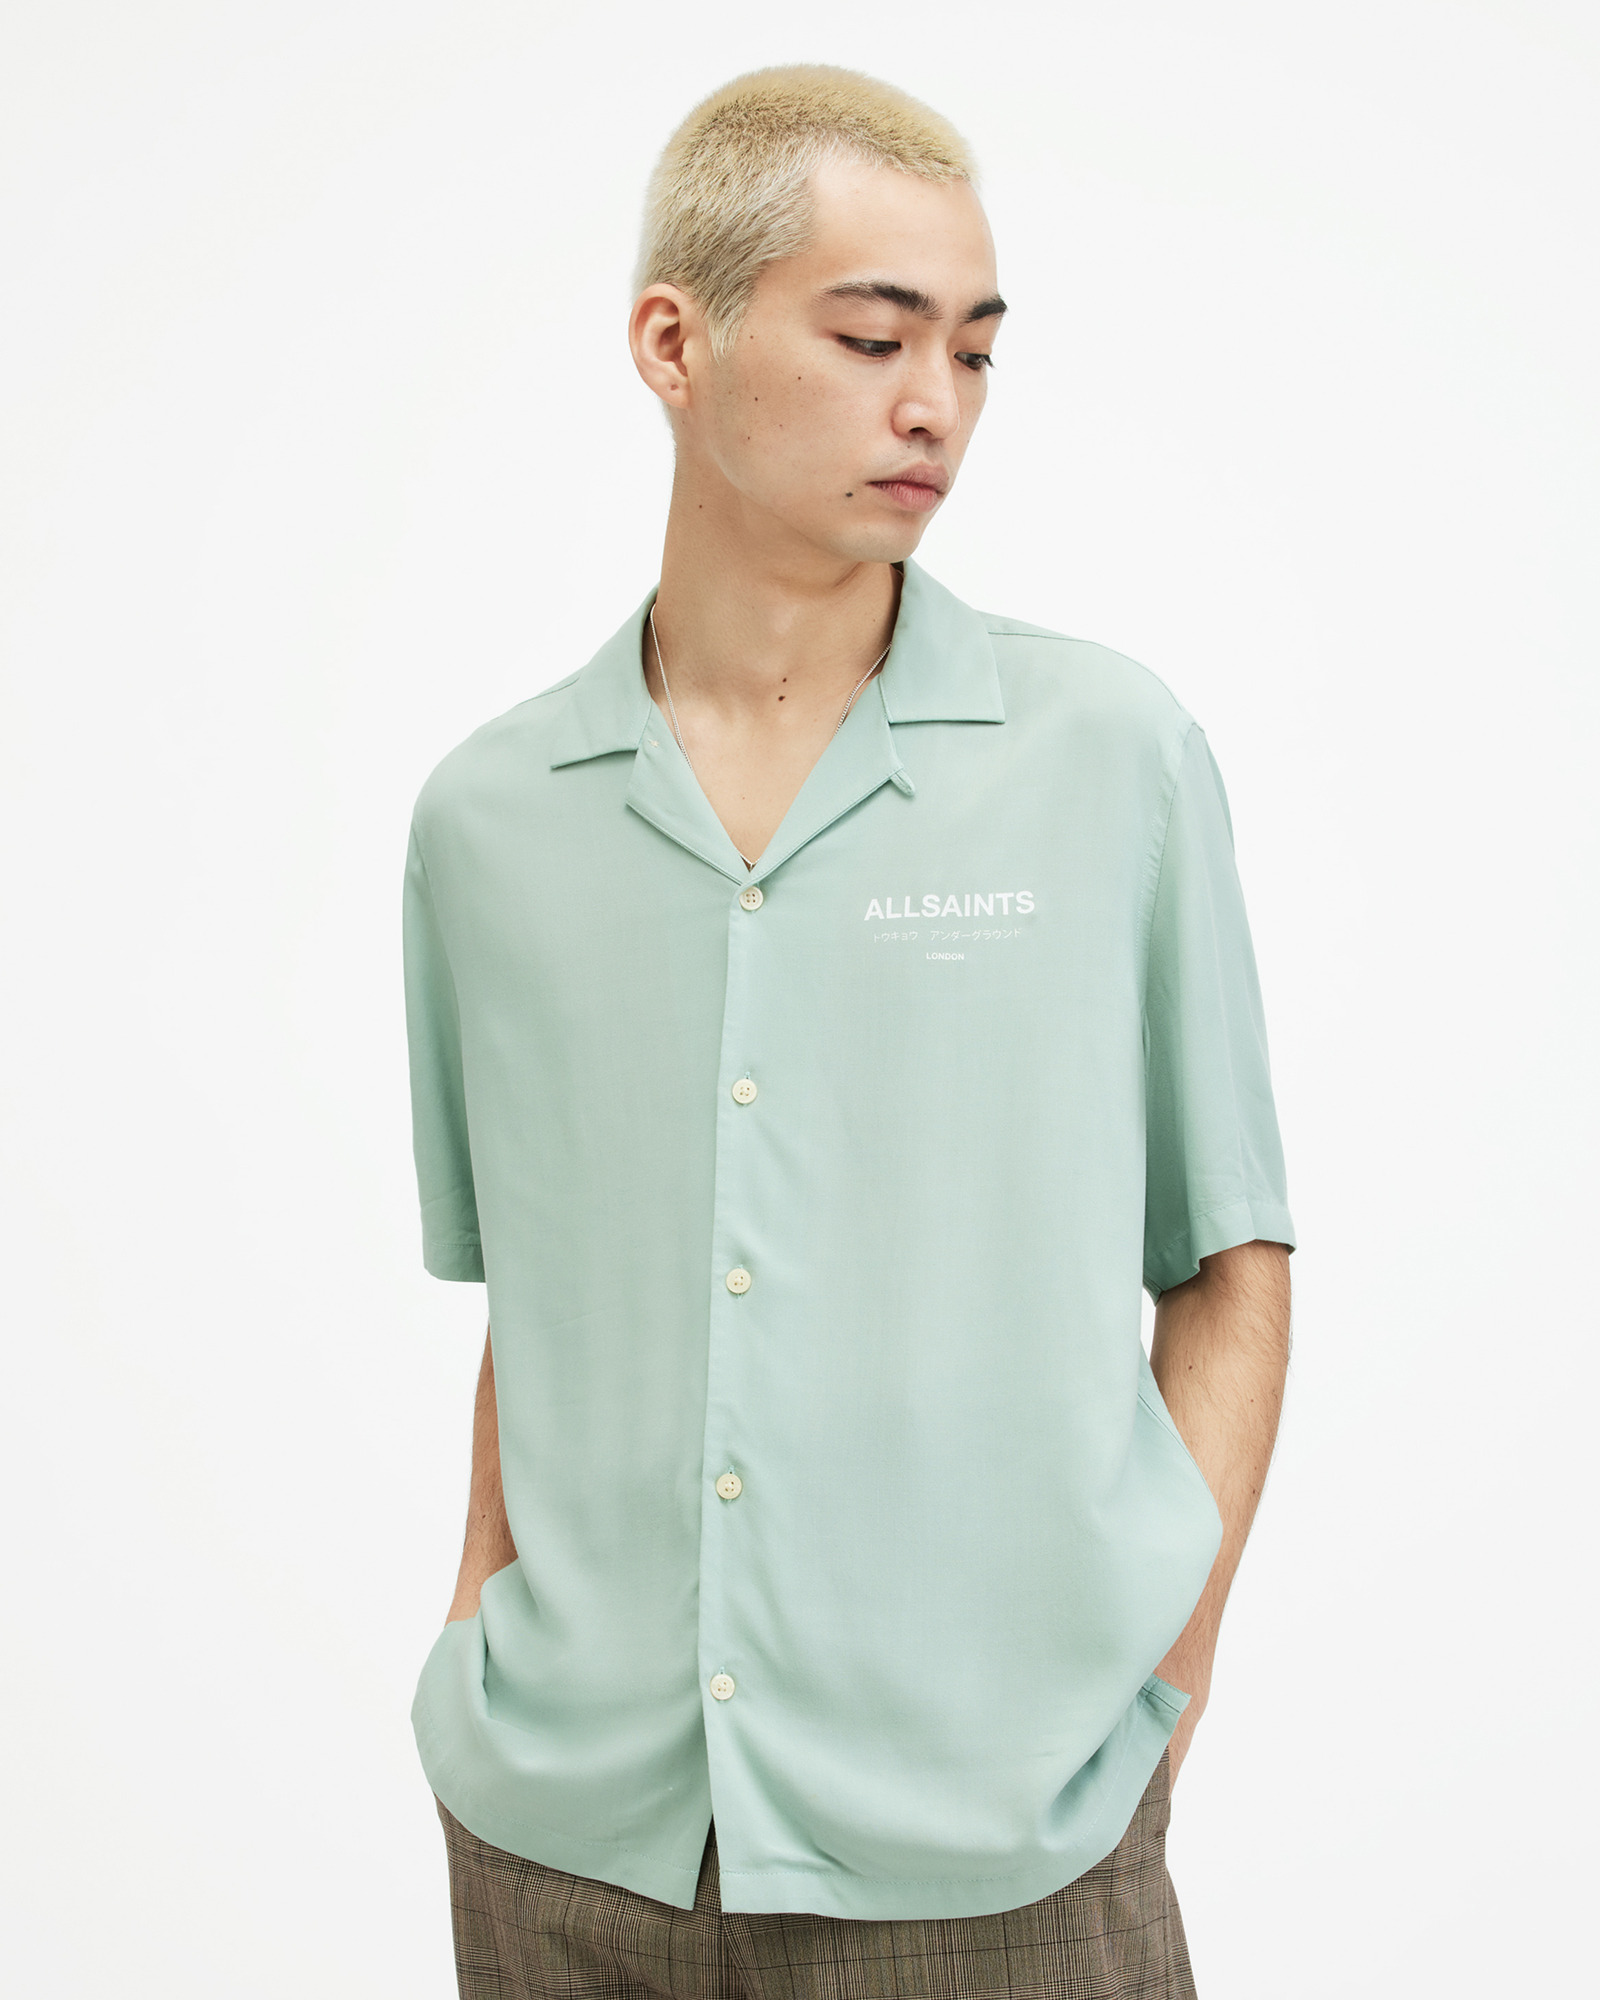 AllSaints Underground Logo Relaxed Fit Shirt,, TEAL GREEN